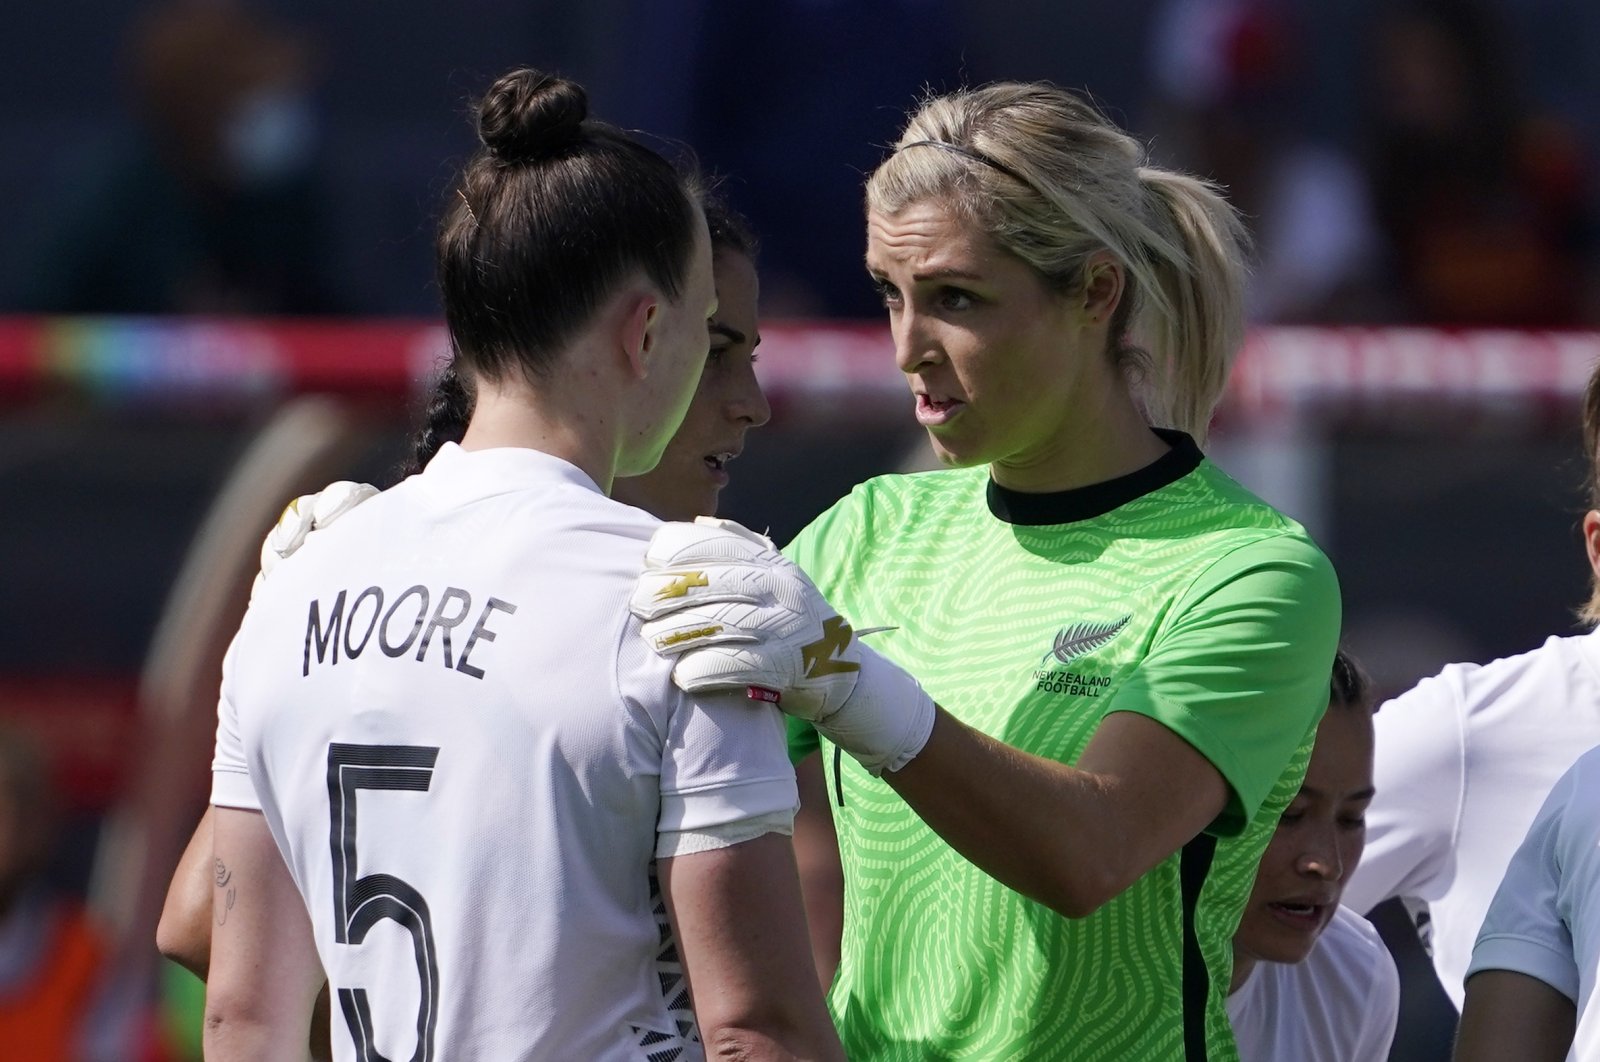 New Zealand goalkeeper Erin Nayler (R) talks to defender Meikayla Moore after an own goal during a 2022 SheBelieves Cup match against the U.S., Carson, California, Feb. 20, 2022. (AP Photo)